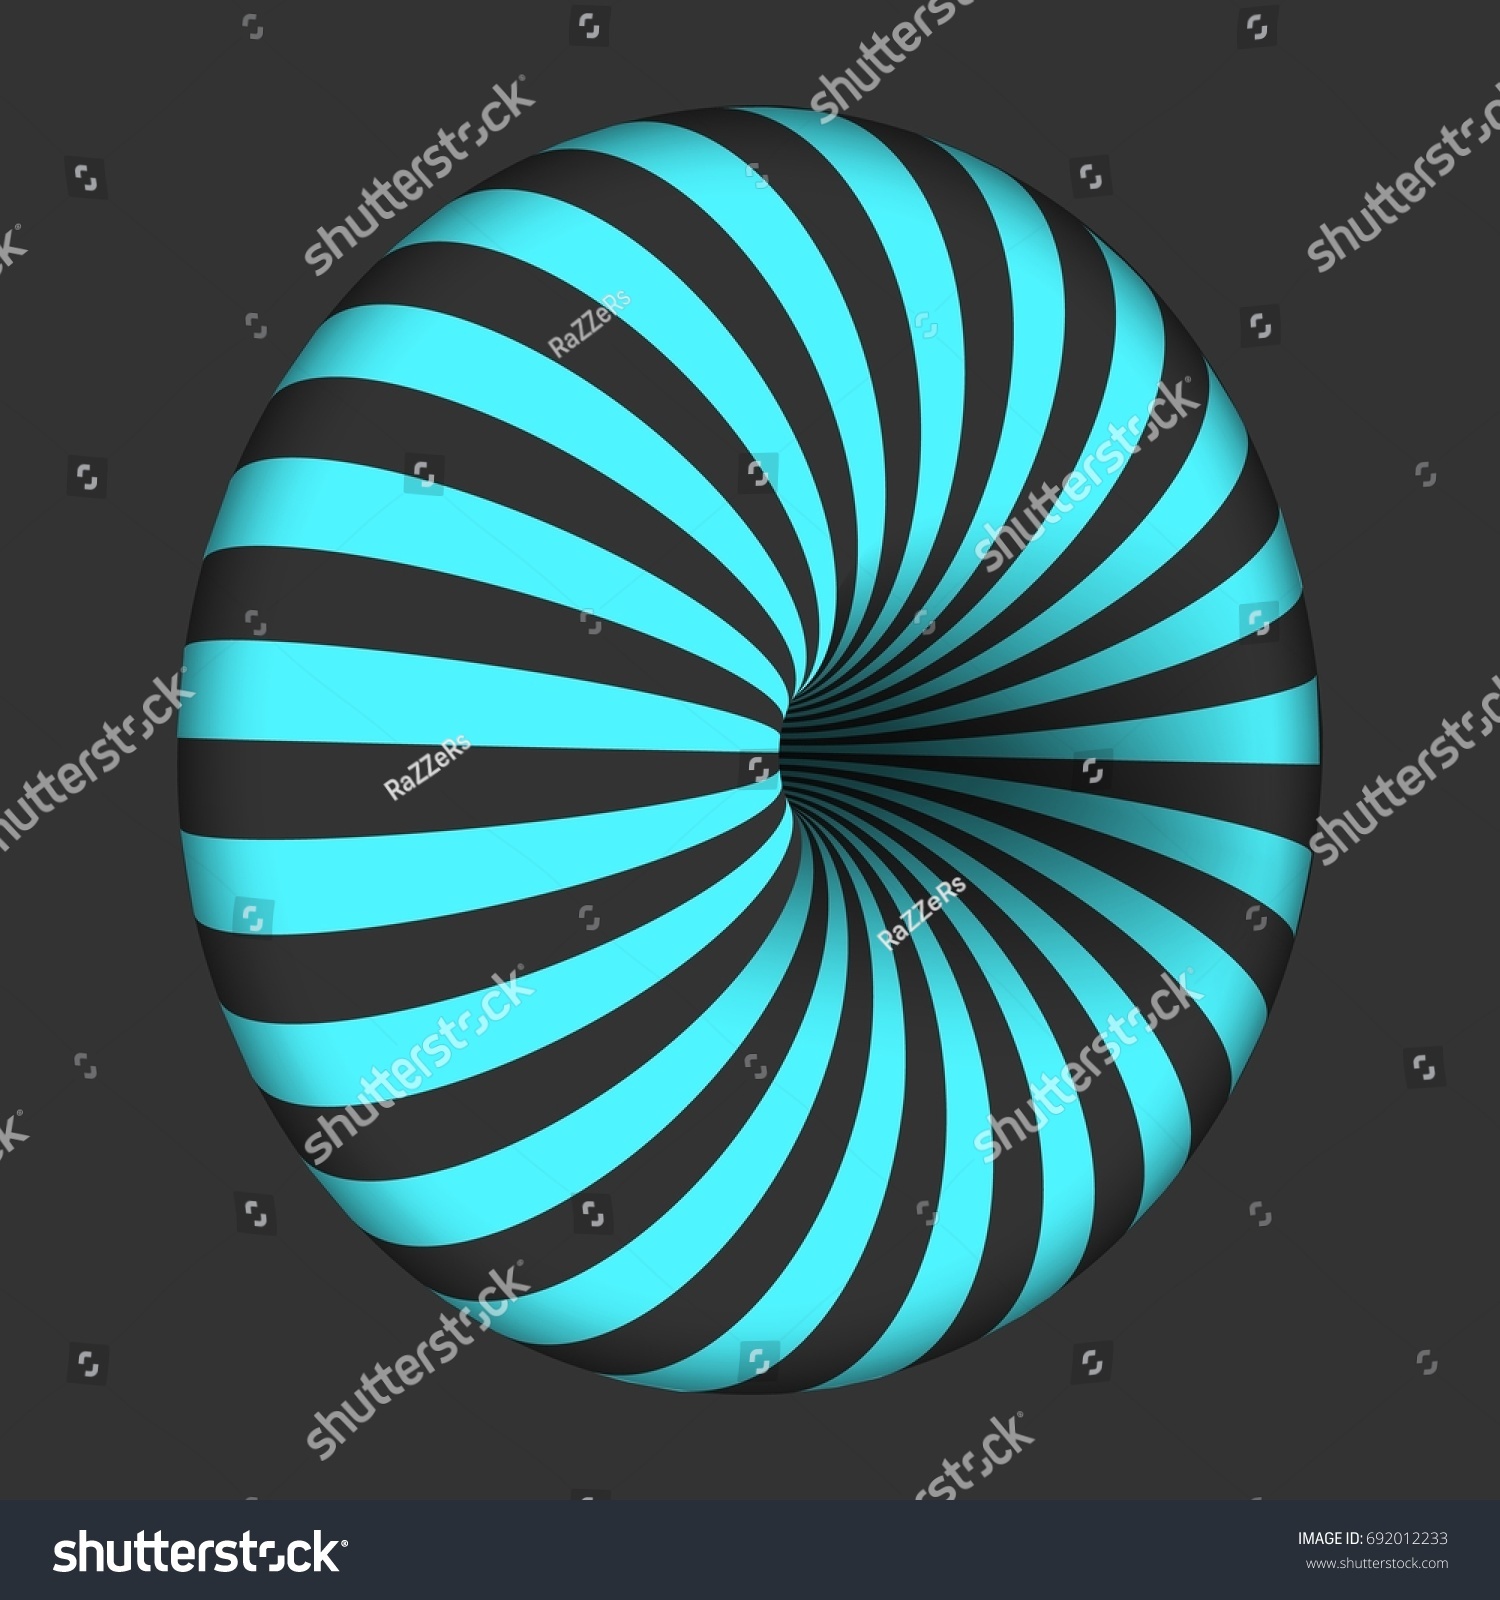 Illustration Vector Spiral Optical Illusion Template Stock Vector Royalty Free 692012233 